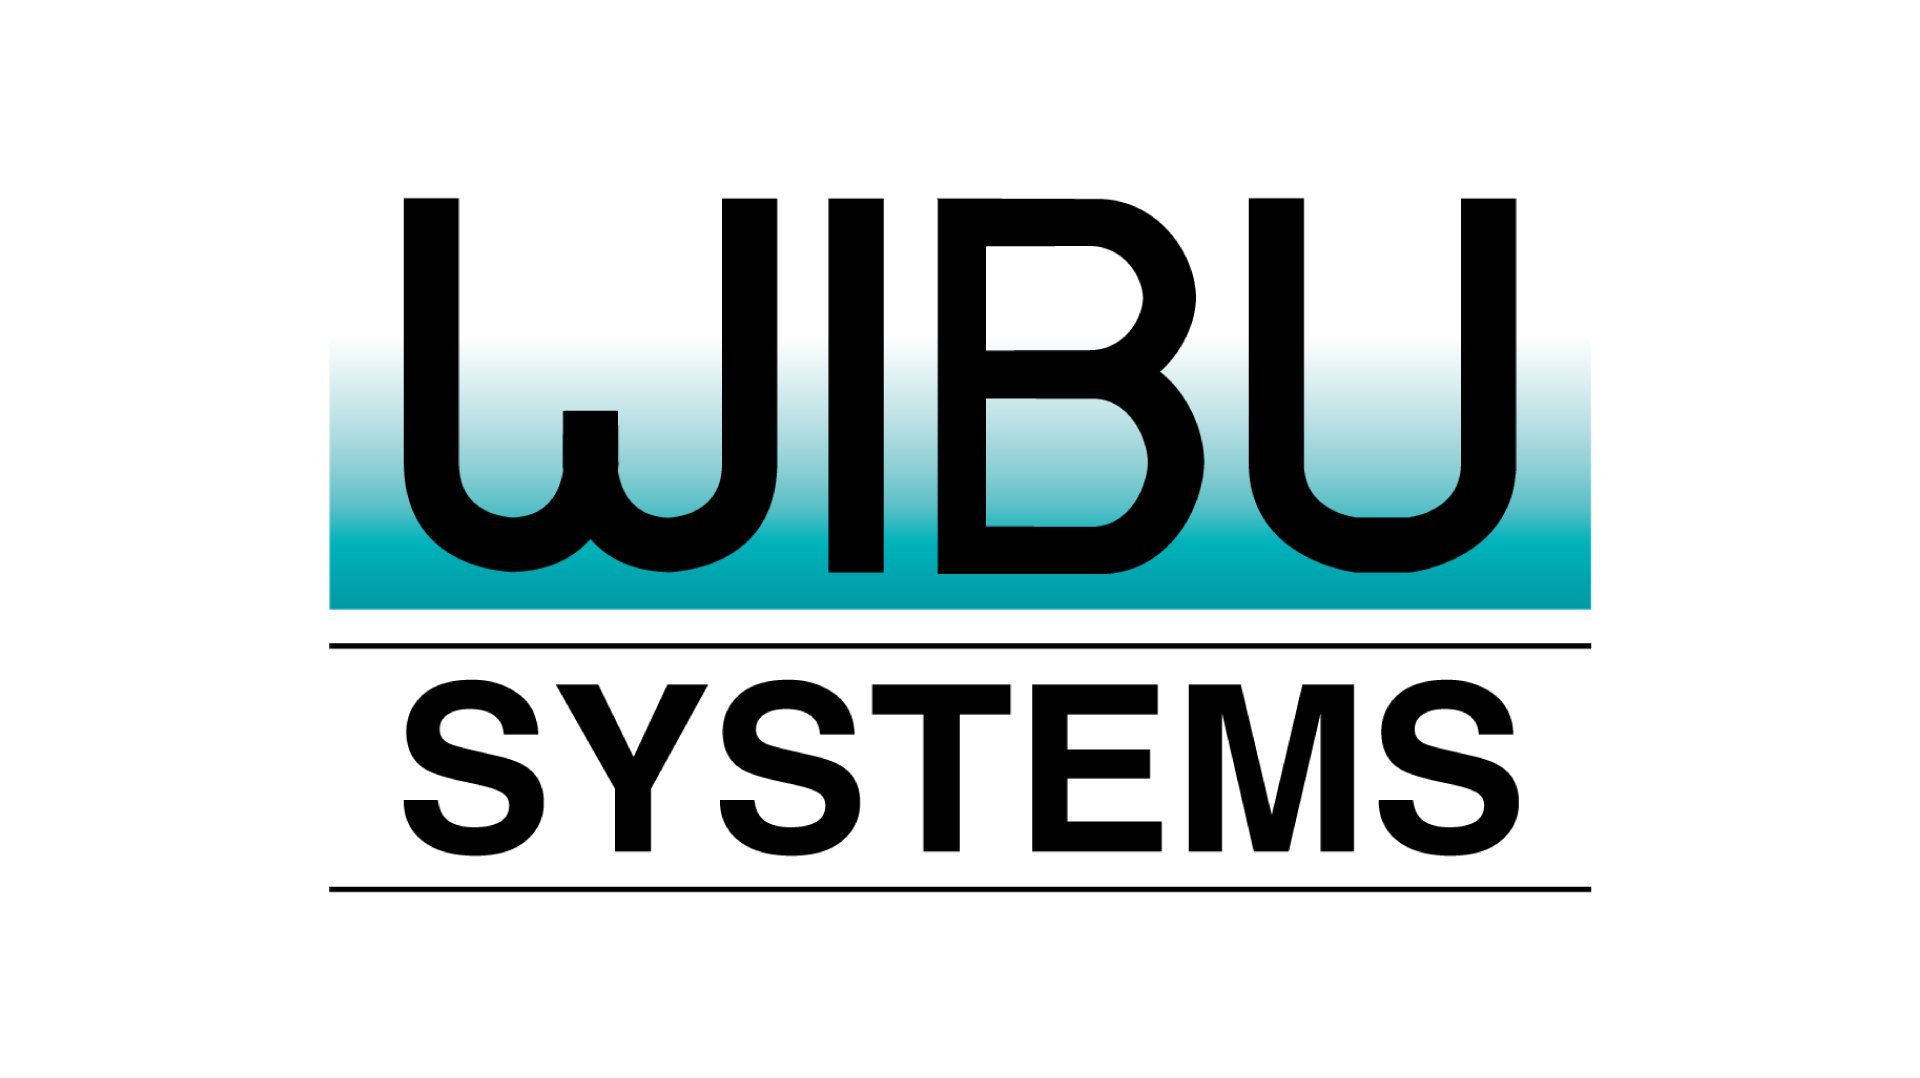 The logo of Wibu-Systems in black letters and a green fade in the background.